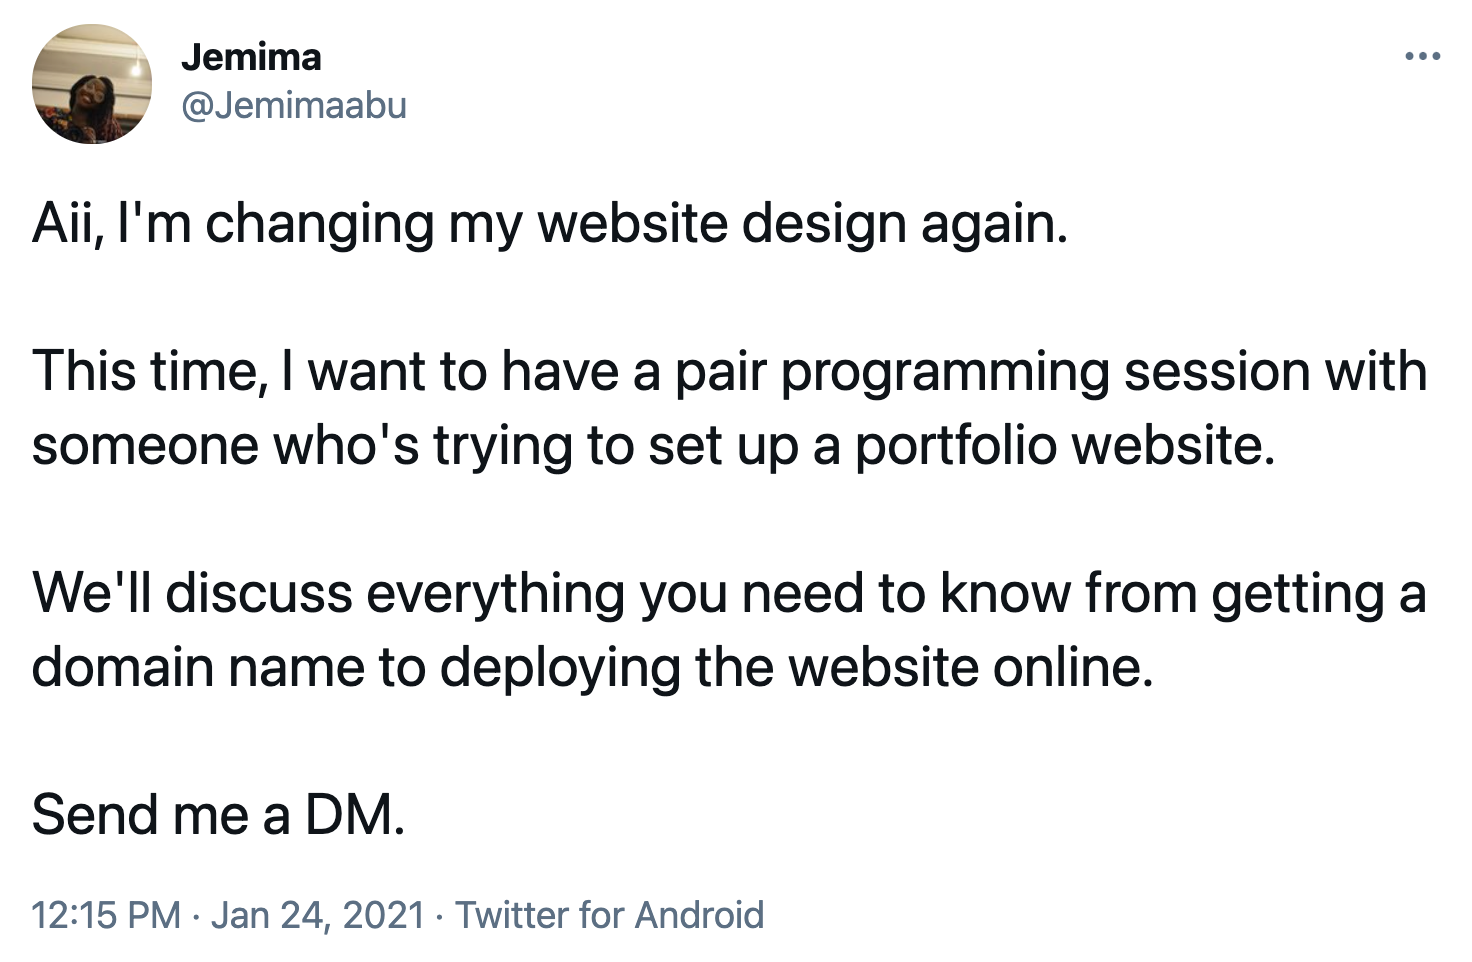 Tweet from @jemimaabu on Twitter. Text says "Aii, I'm changing my website design again. This time, I want to have a pair programming session with someone who's trying to set up a portfolio website. We'll discuss everything you need to know from getting a domain name to deploying the website online. Send me a DM". 12:15PM. Jan 24, 2021. Twitter for Android